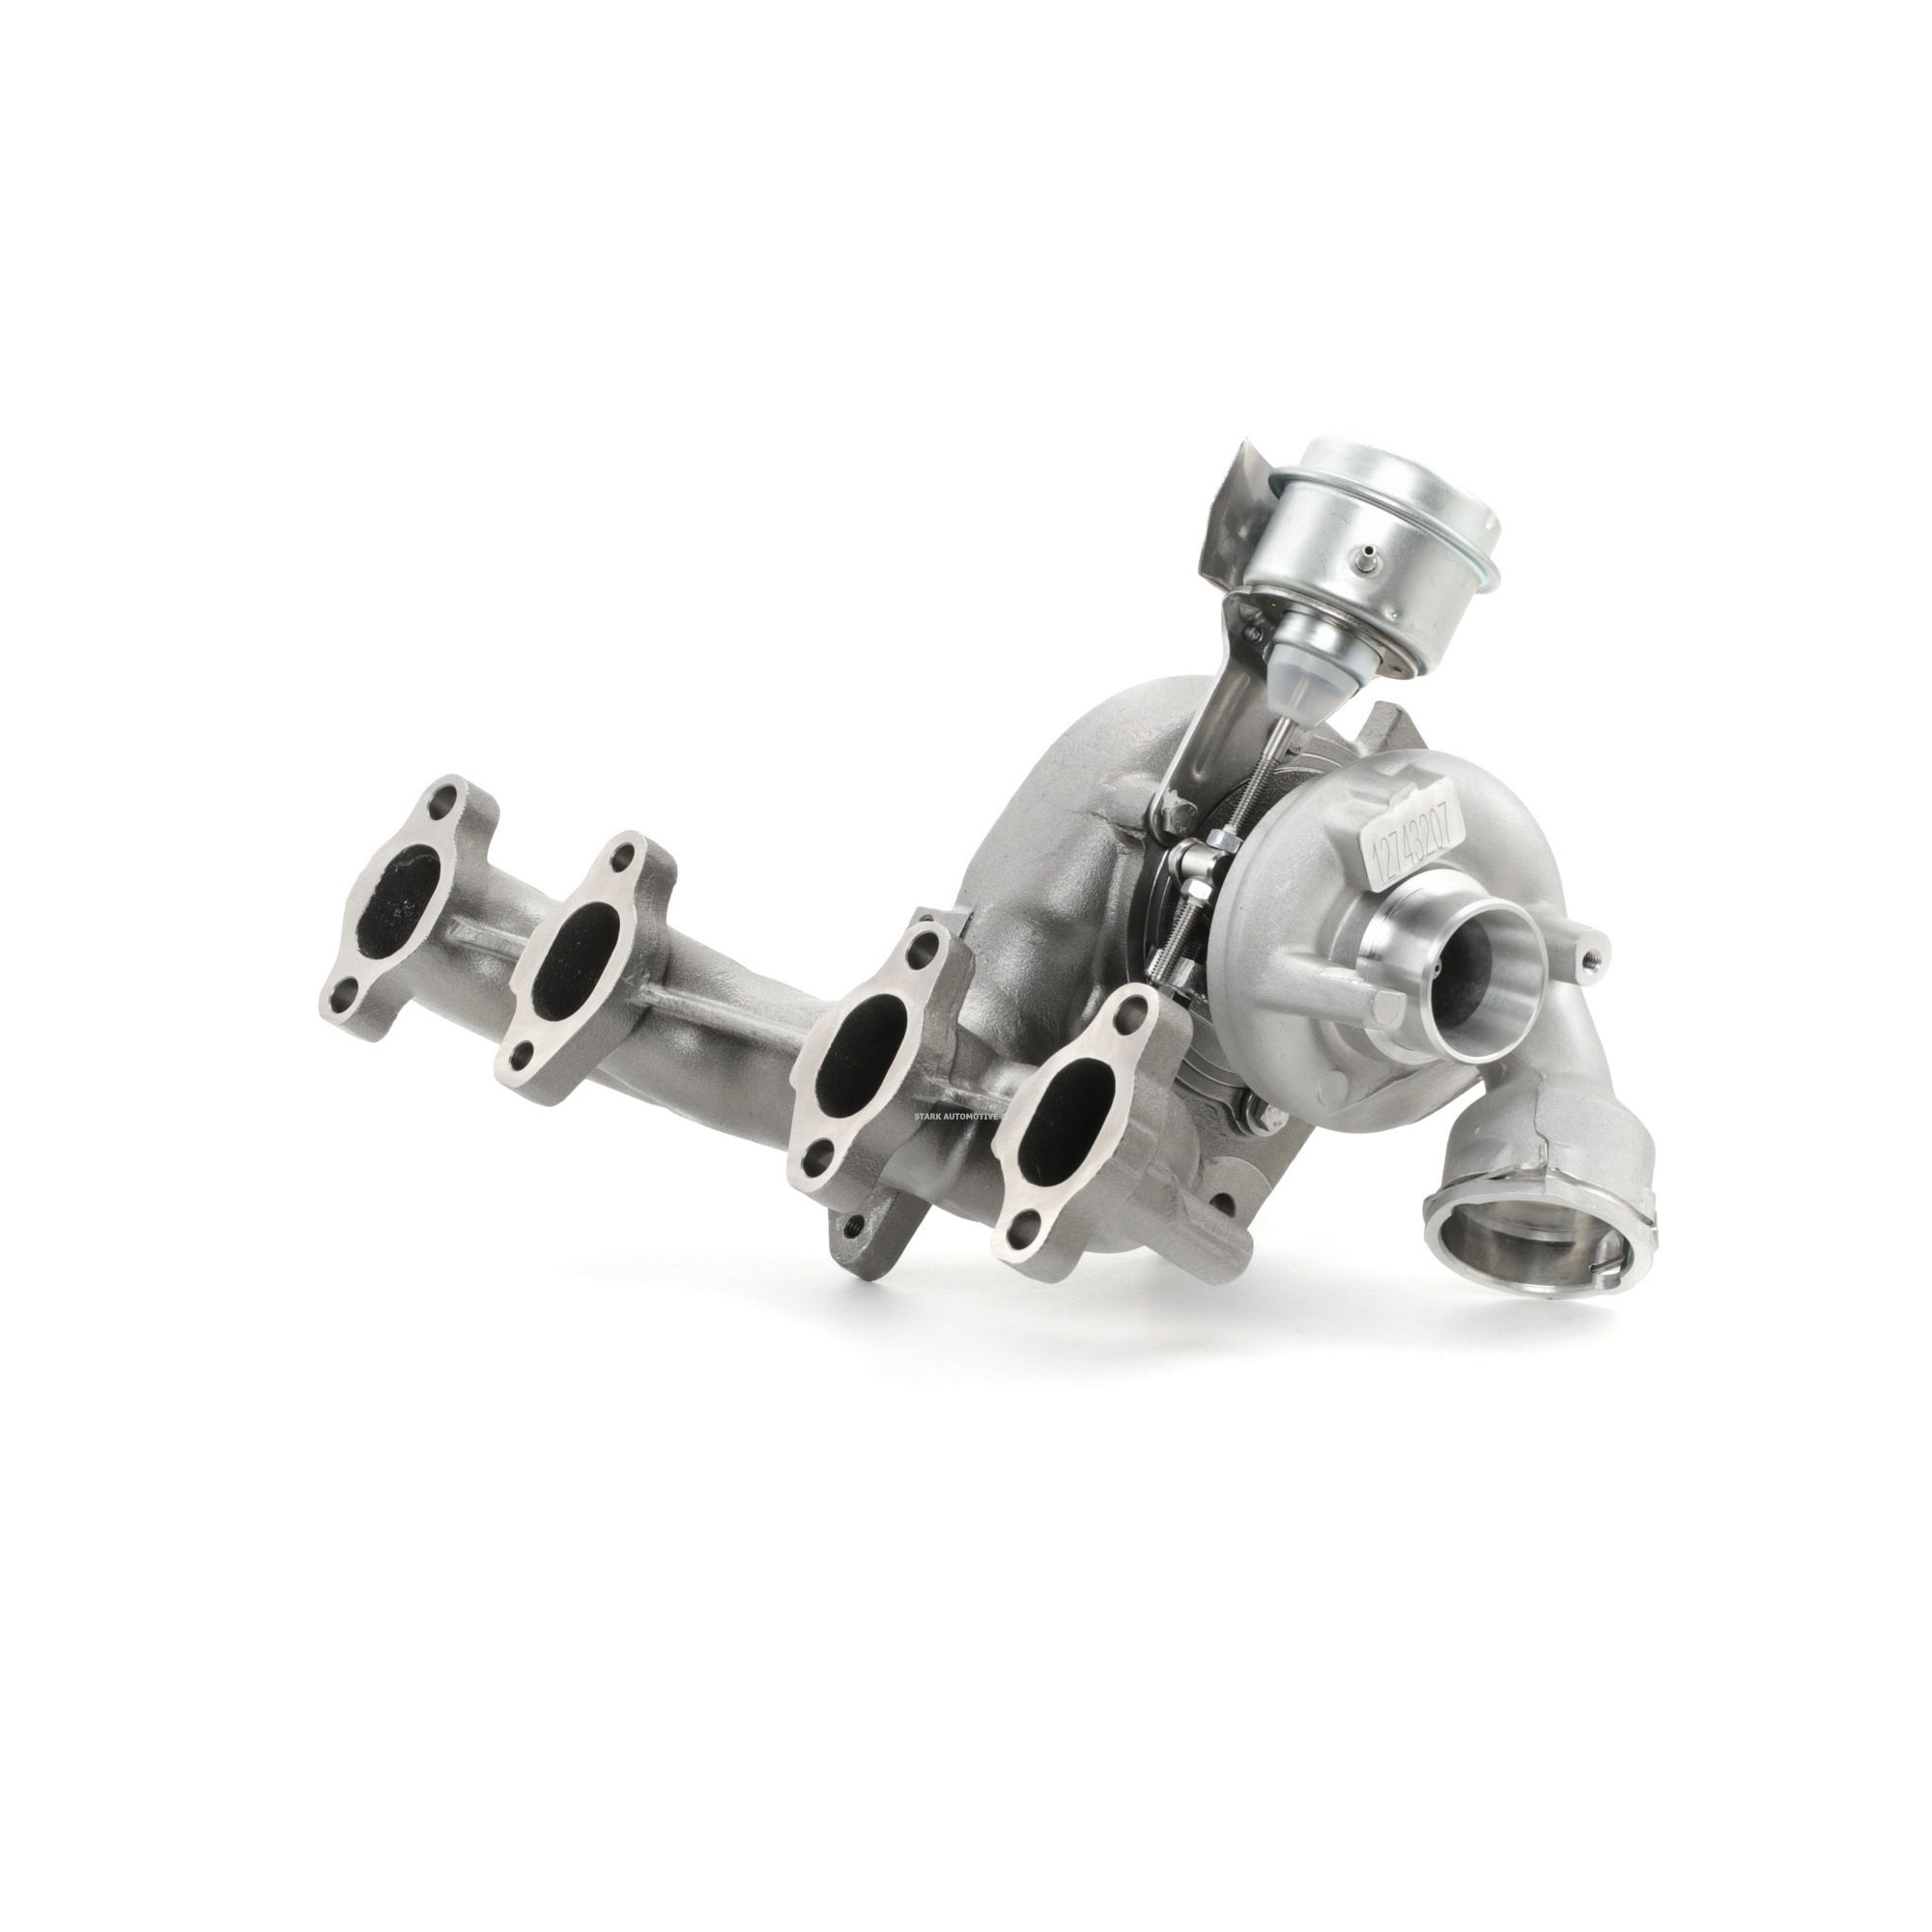 STARK SKCT-1190055 Turbocharger Exhaust Turbocharger, Turbocharger/Charge Air cooler, without attachment material